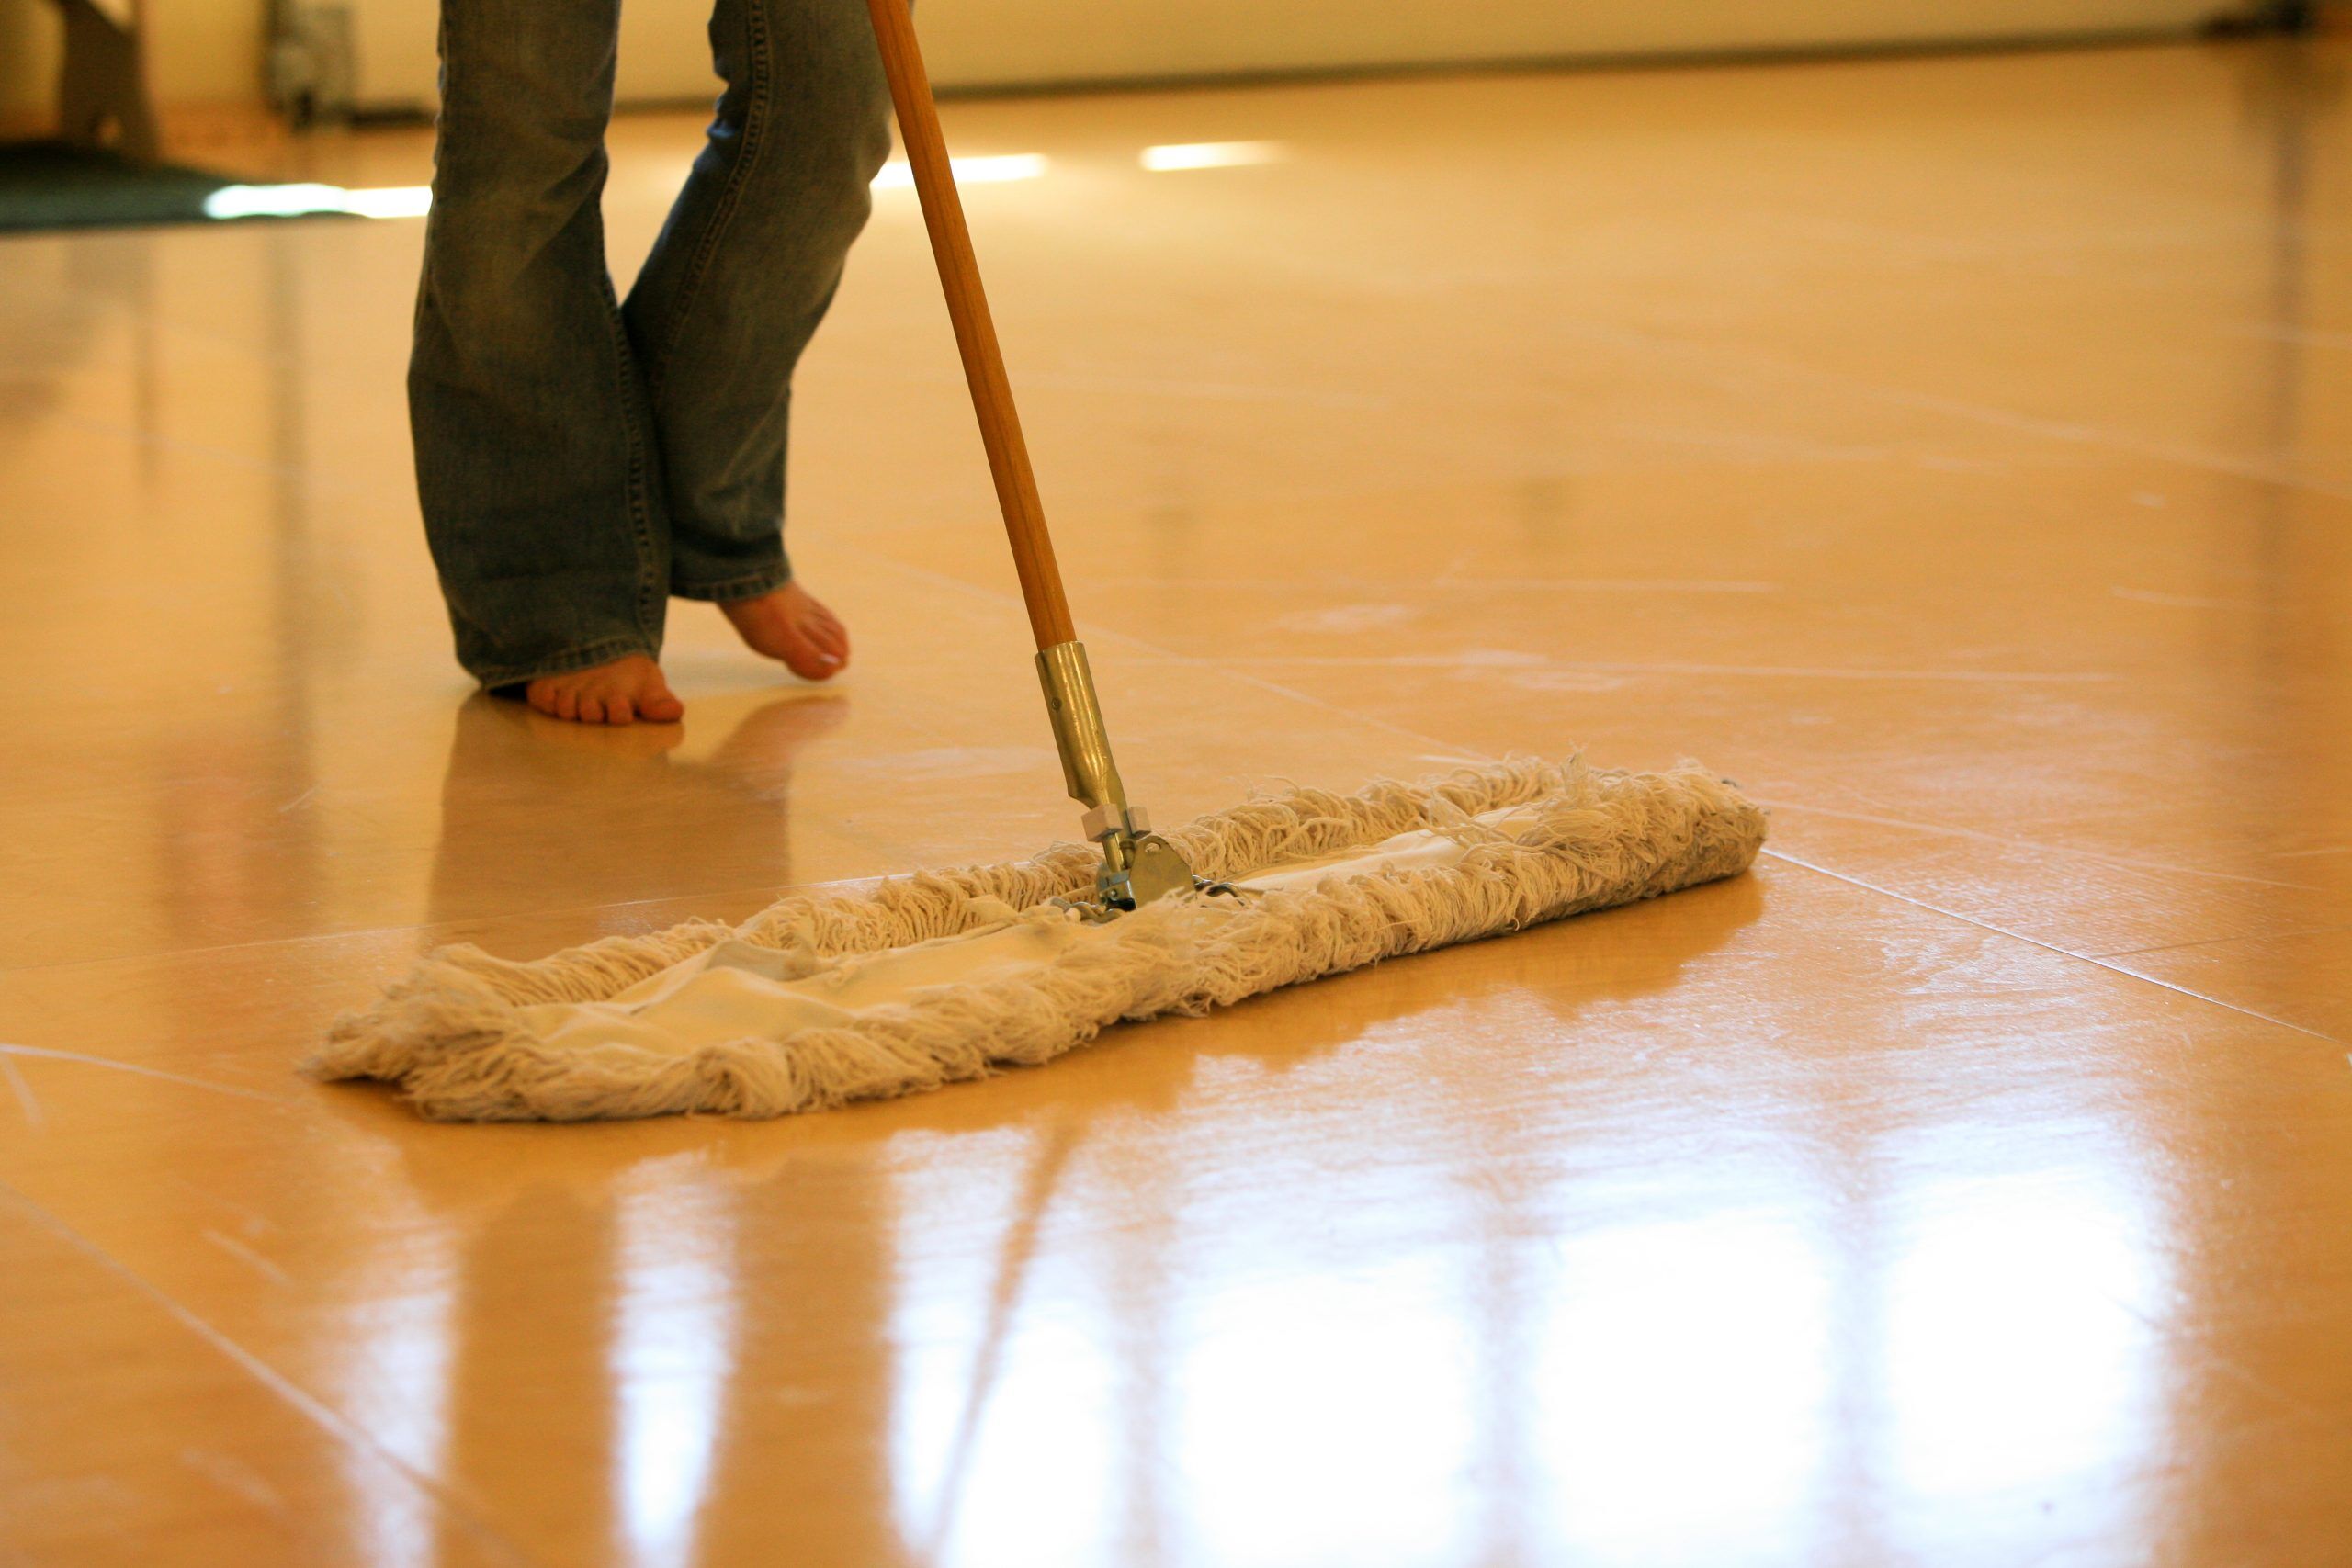 Dry mop for cleaning polished floors that are slippery when wet